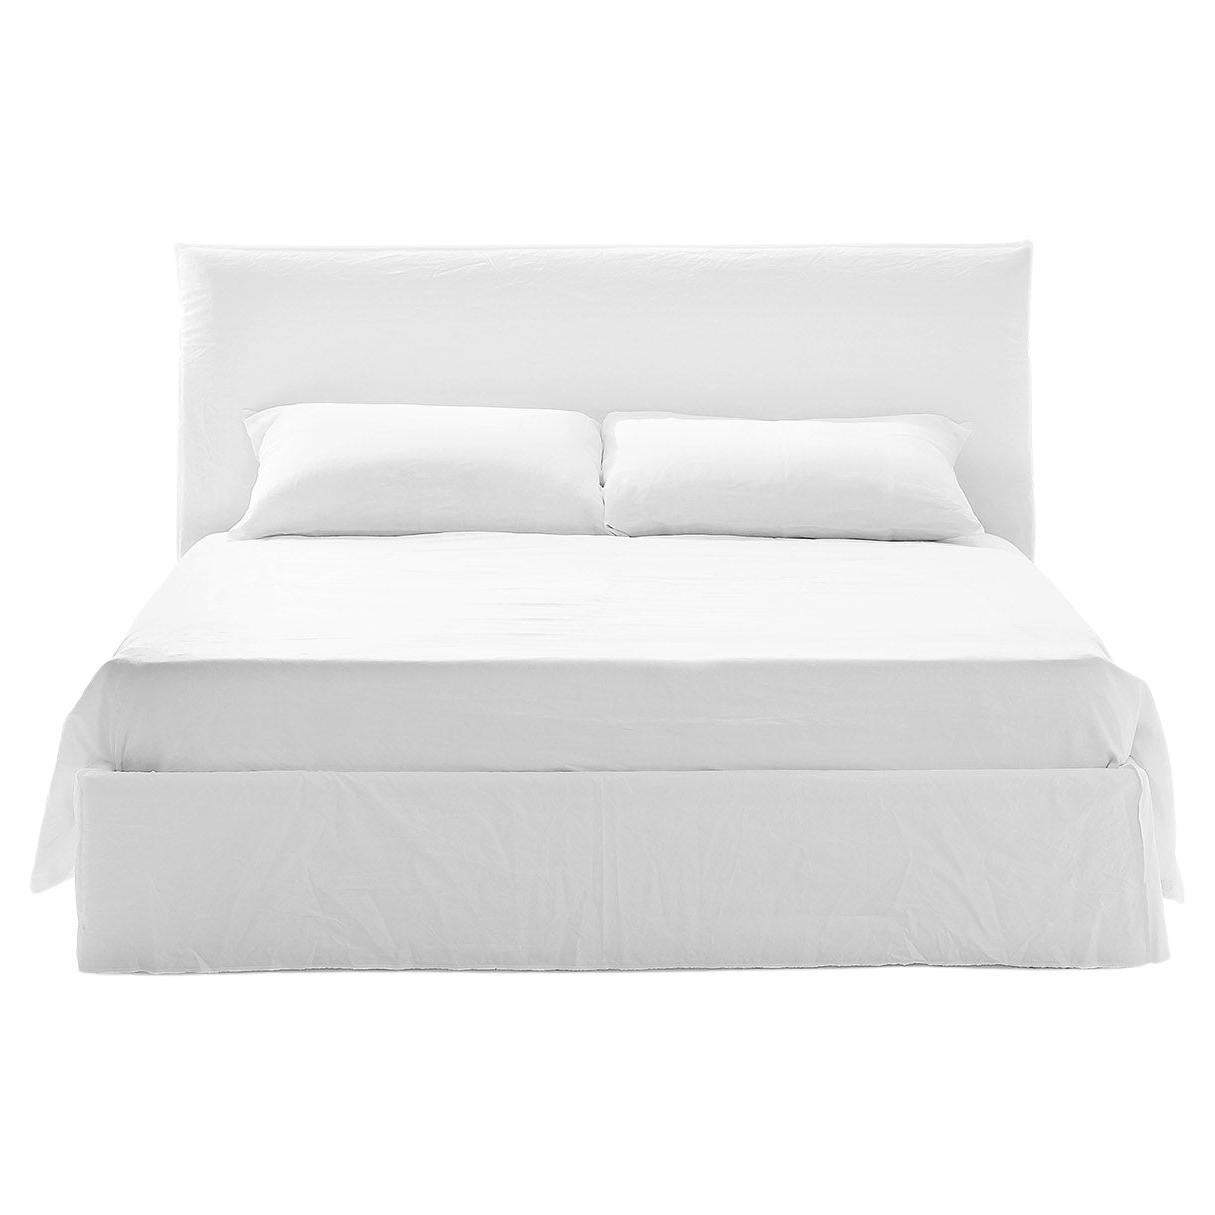 Gervasoni Ghost 80 Queen Knock Down Bed in White Linen Upholstery, Paola Navone